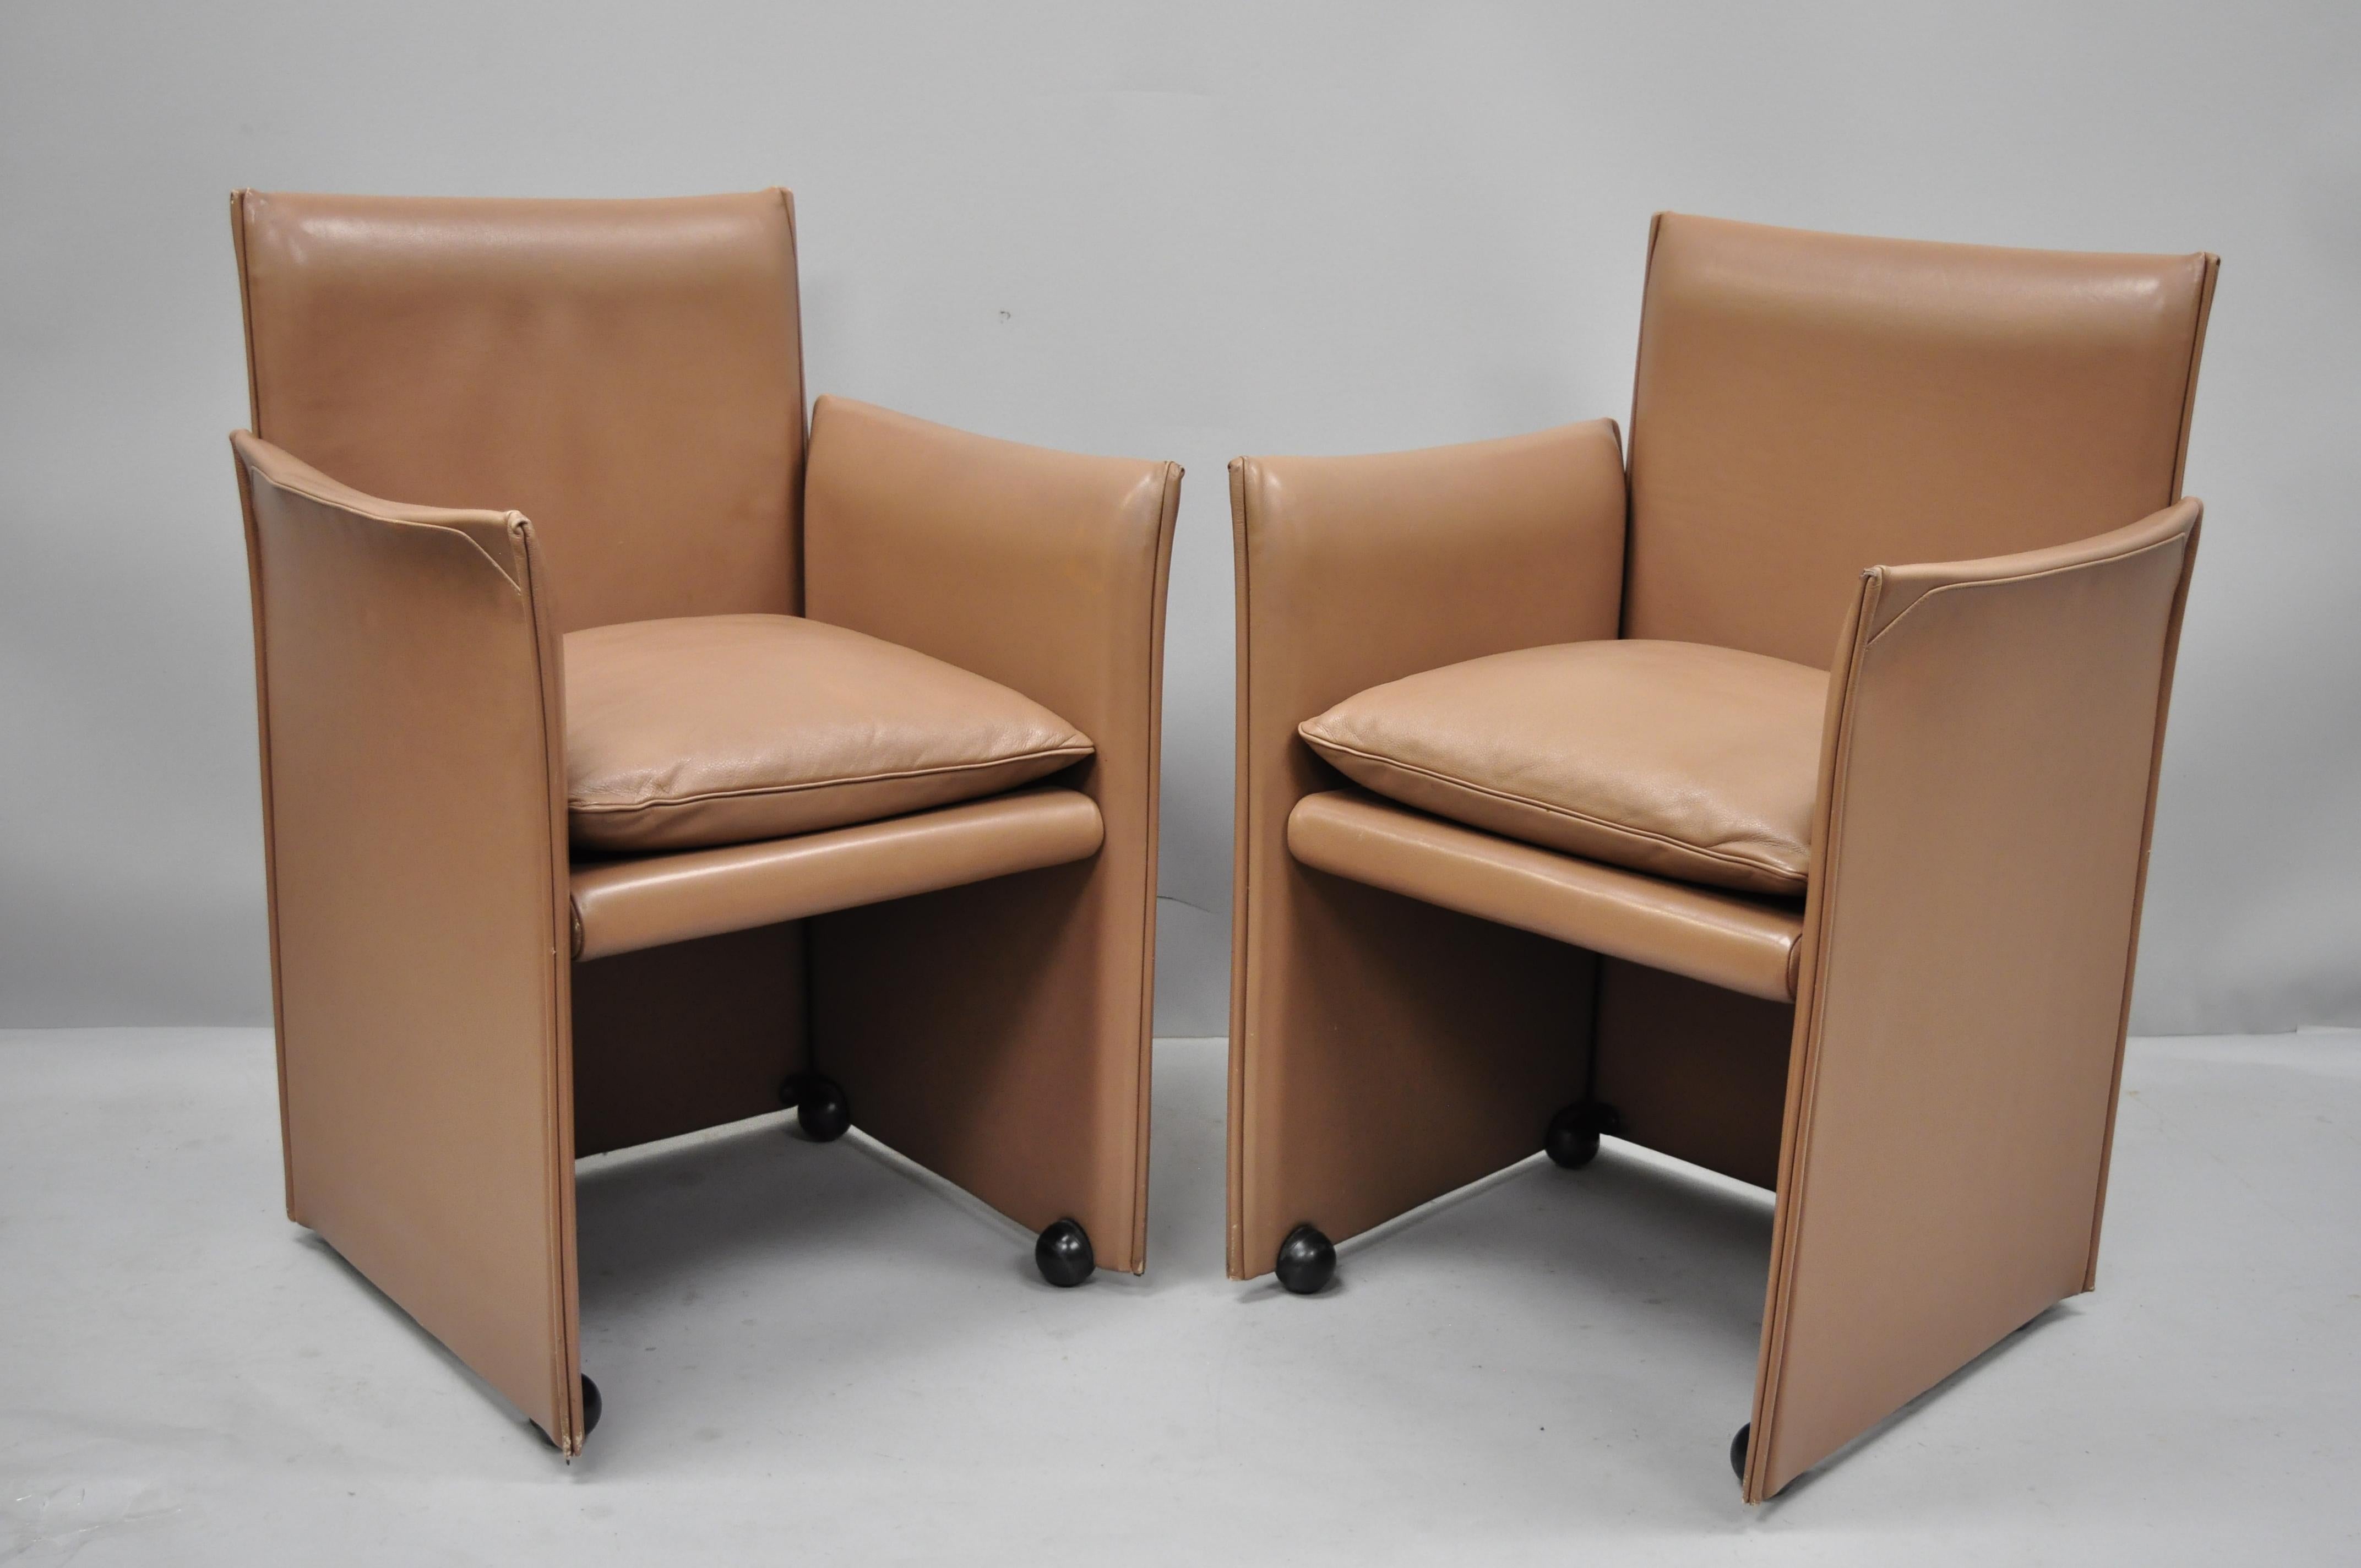 Pair of 401 break armchair by Mario Bellini for Cassina copper leather. Listing includes full leather wrapped frames, rolling casters, original label, clean modern lines, sleek and sculptural form, circa late 20th century. Measurements: 33